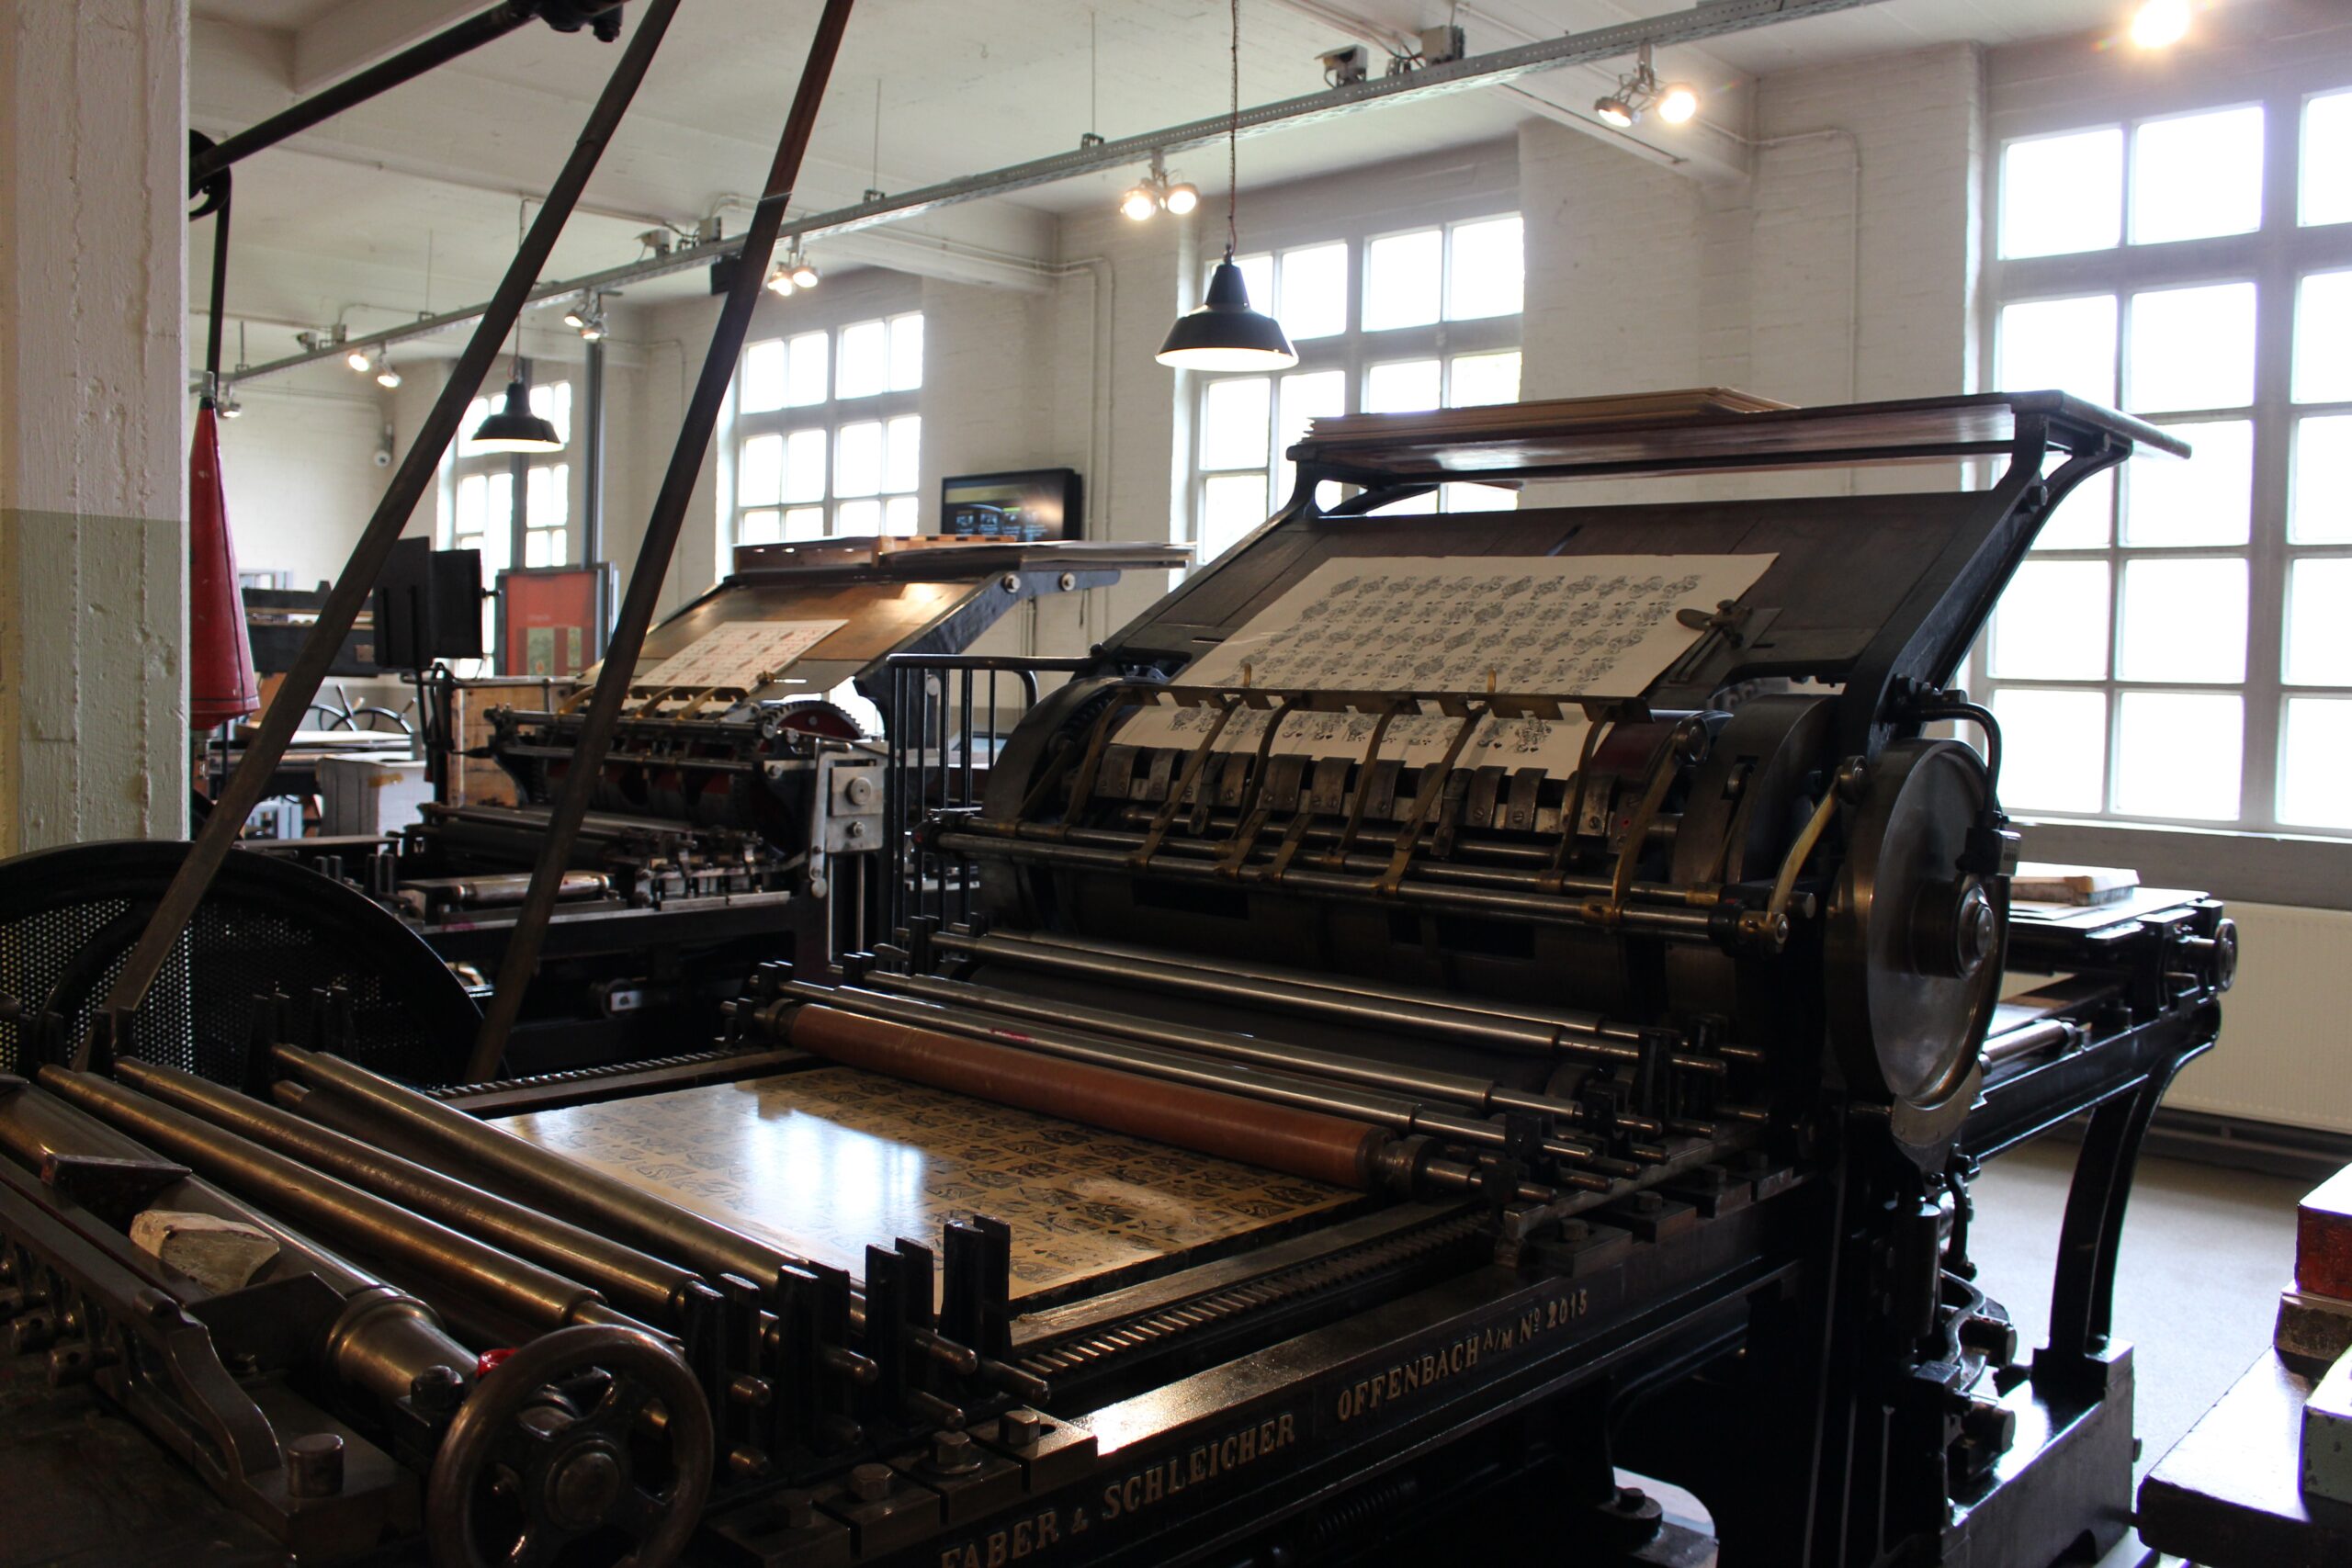 An image of an old offset press.